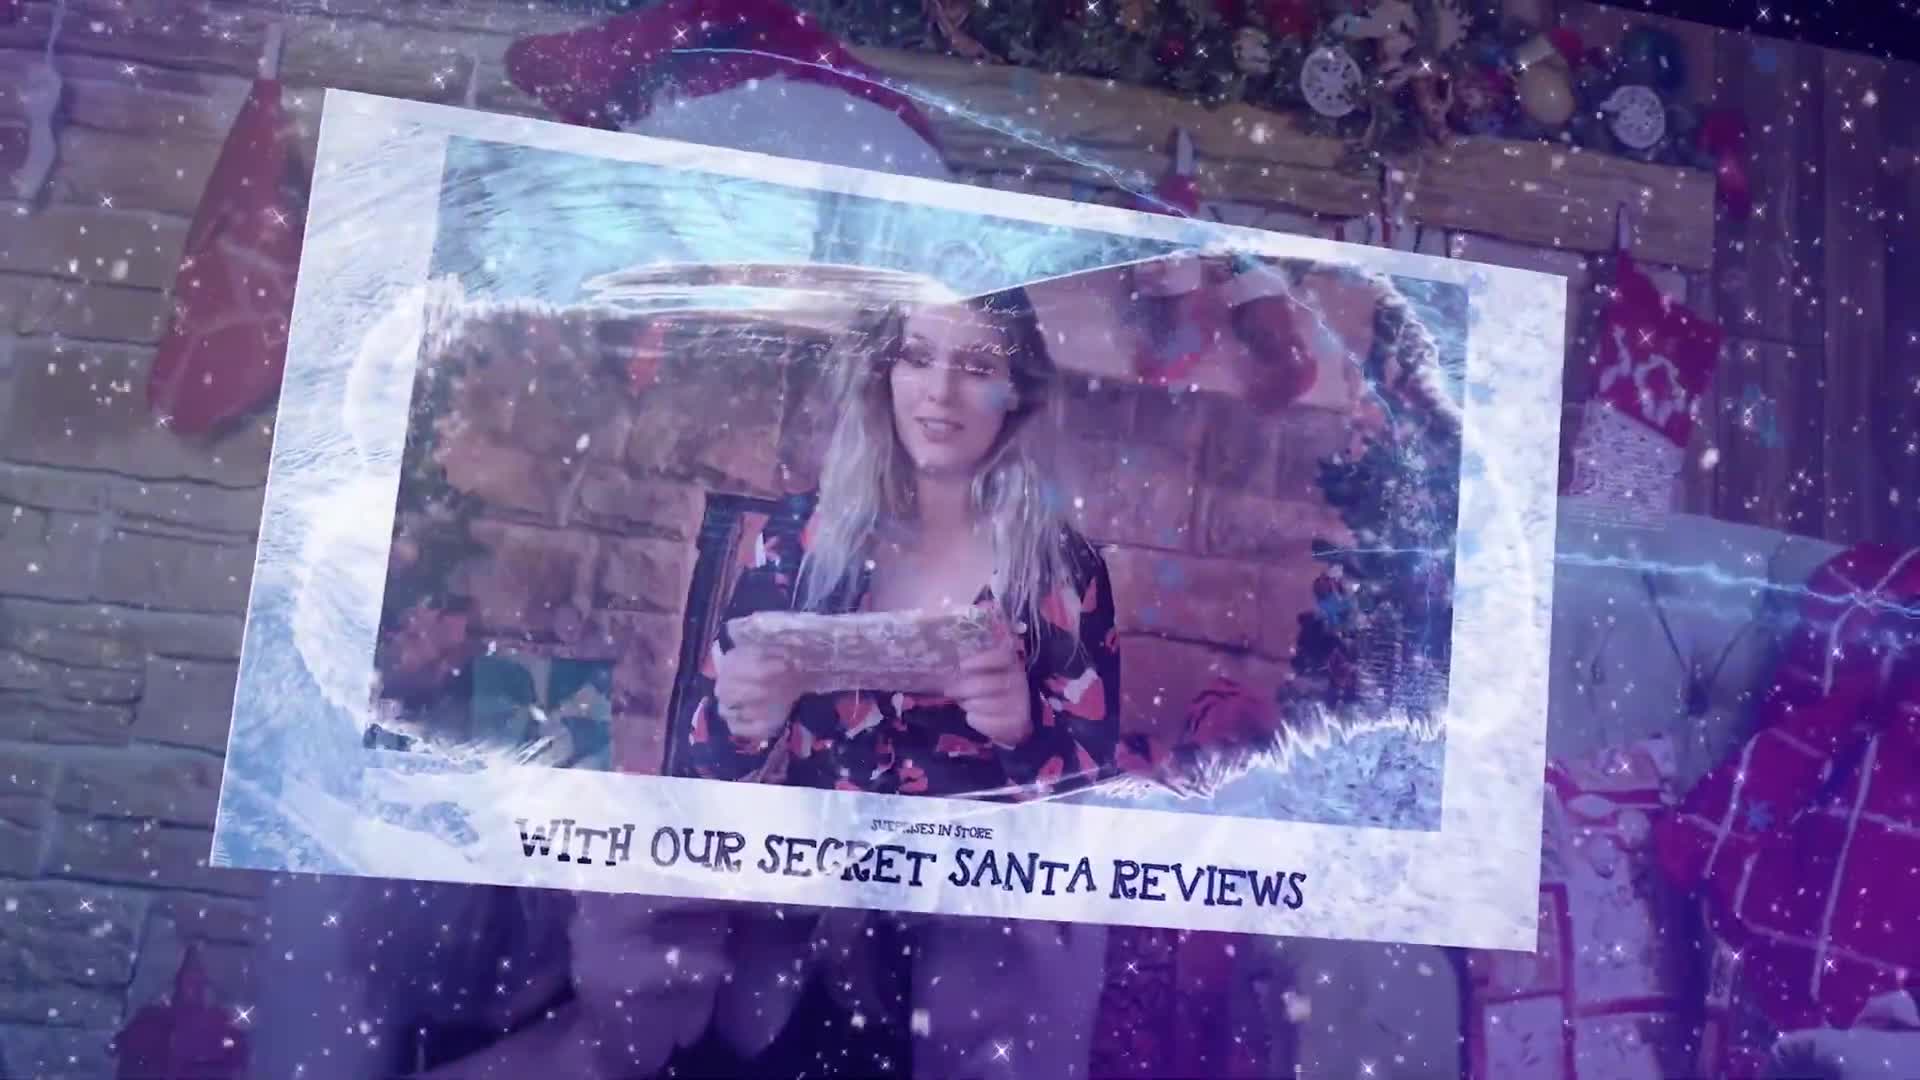 Samantha Alexandra presents our 2020 Christmas message and launches a month of special reviews